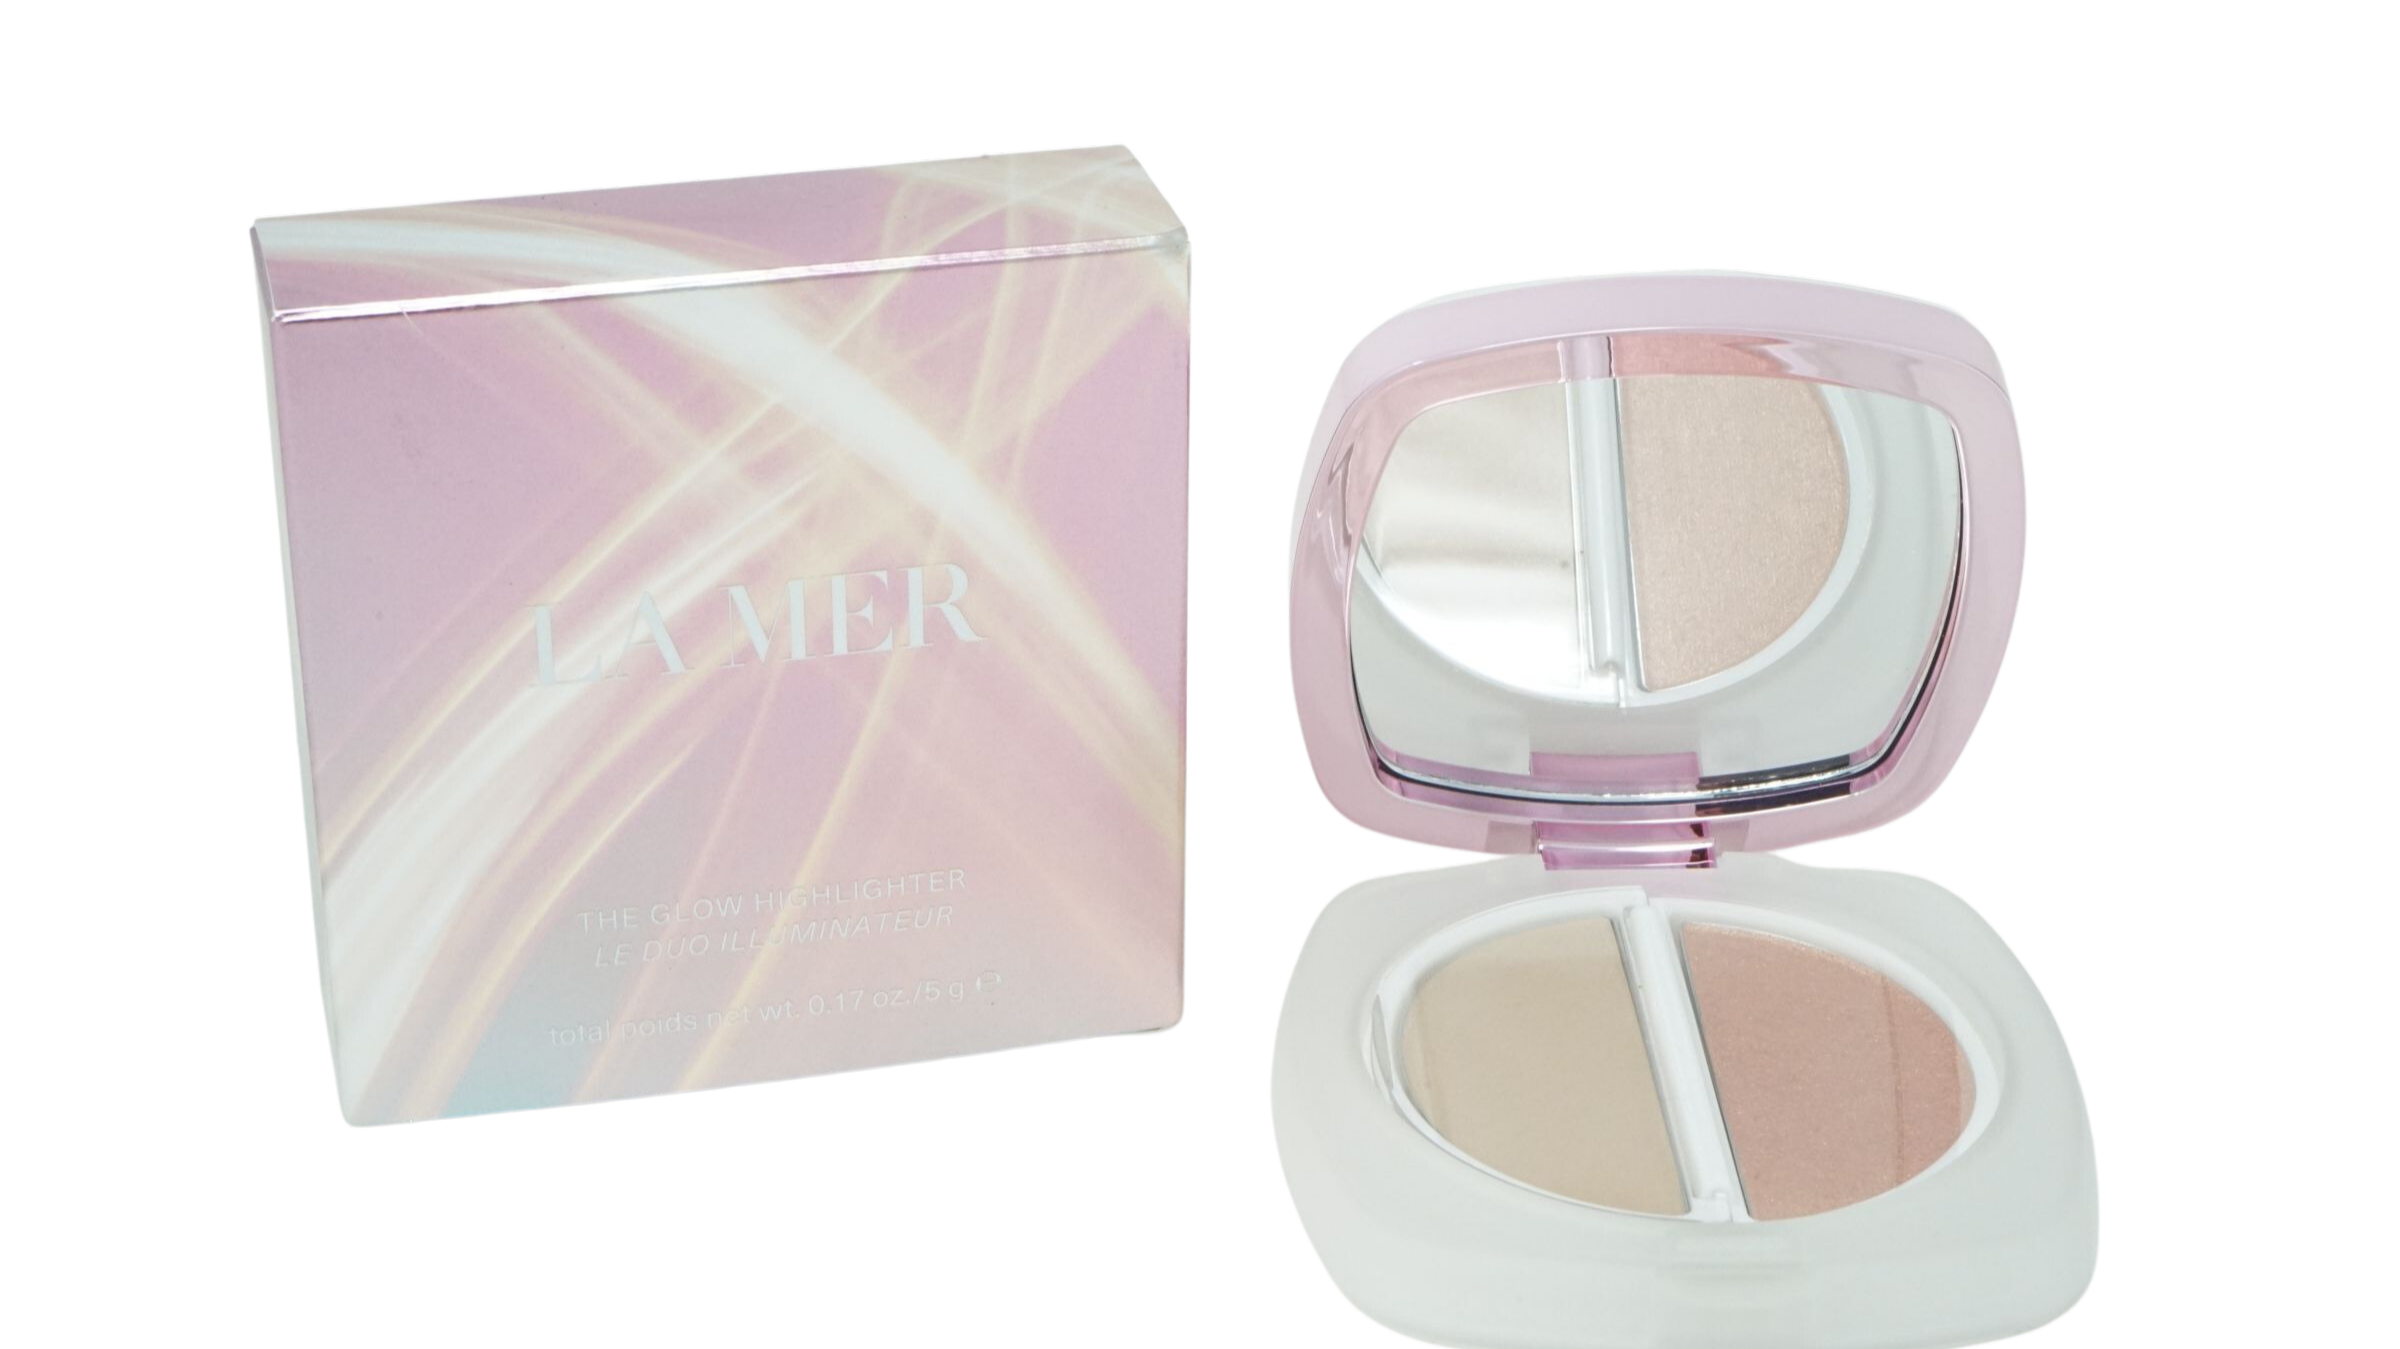 La Mer The Glow Palette Highlighter Le Duo 5g